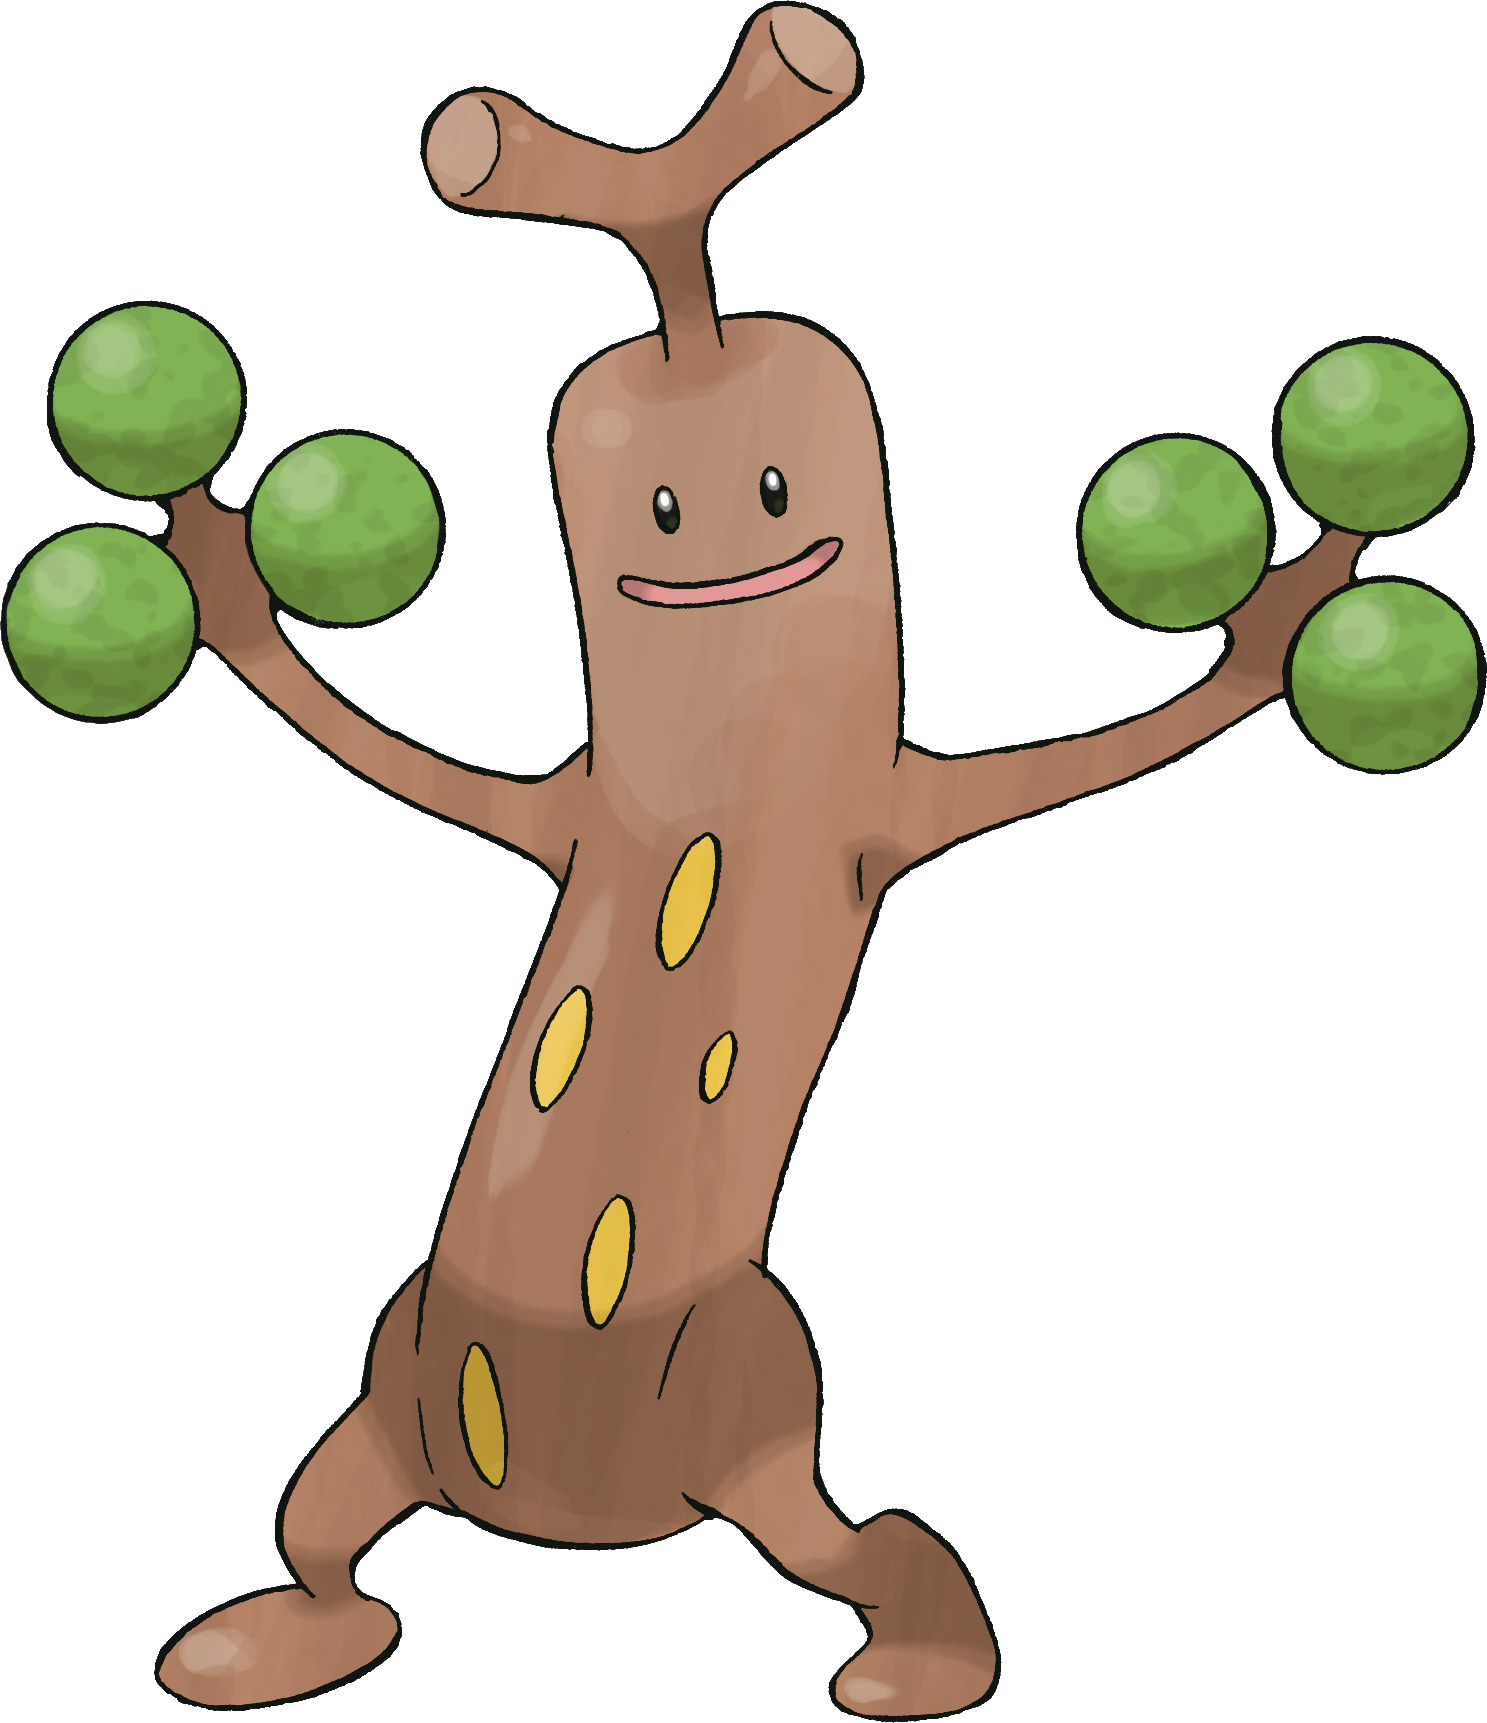 And Then Later On It Evolved Into A Pokemon - Pokemon Sudowoodo (1487x1723)